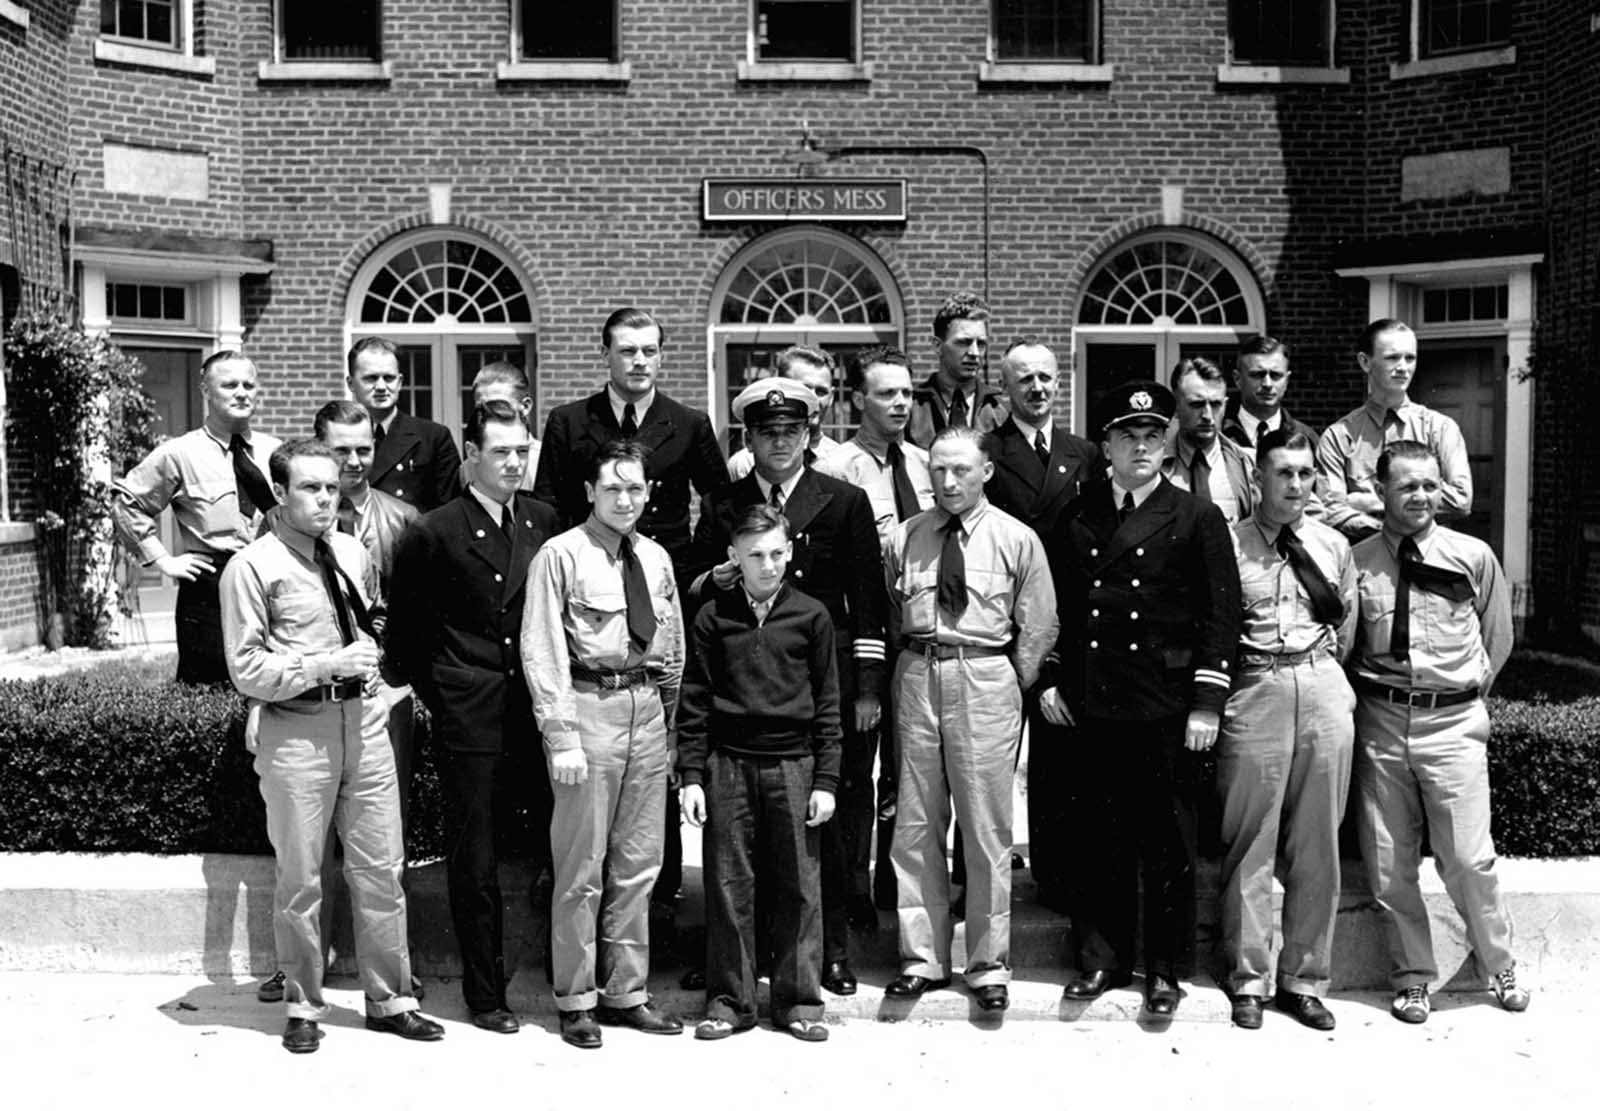 Surviving members of the crew aboard the ill-fated German zeppelin Hindenburg are photographed at the Naval Air station in Lakehurst, New Jersey, on May 7, 1937. Rudolph Sauter, chief engineer, is at center wearing white cap; behind him is Heinrich Kubis, a steward; Heinrich Bauer, watch officer, is third from right wearing black cap; and 13-year-old Werner Franz, cabin boy, is center front row. Several members of the airship's crew are wearing U.S. Marine summer clothing furnished them to replace clothing burned from many of their bodies as they escaped from the flaming dirigible.